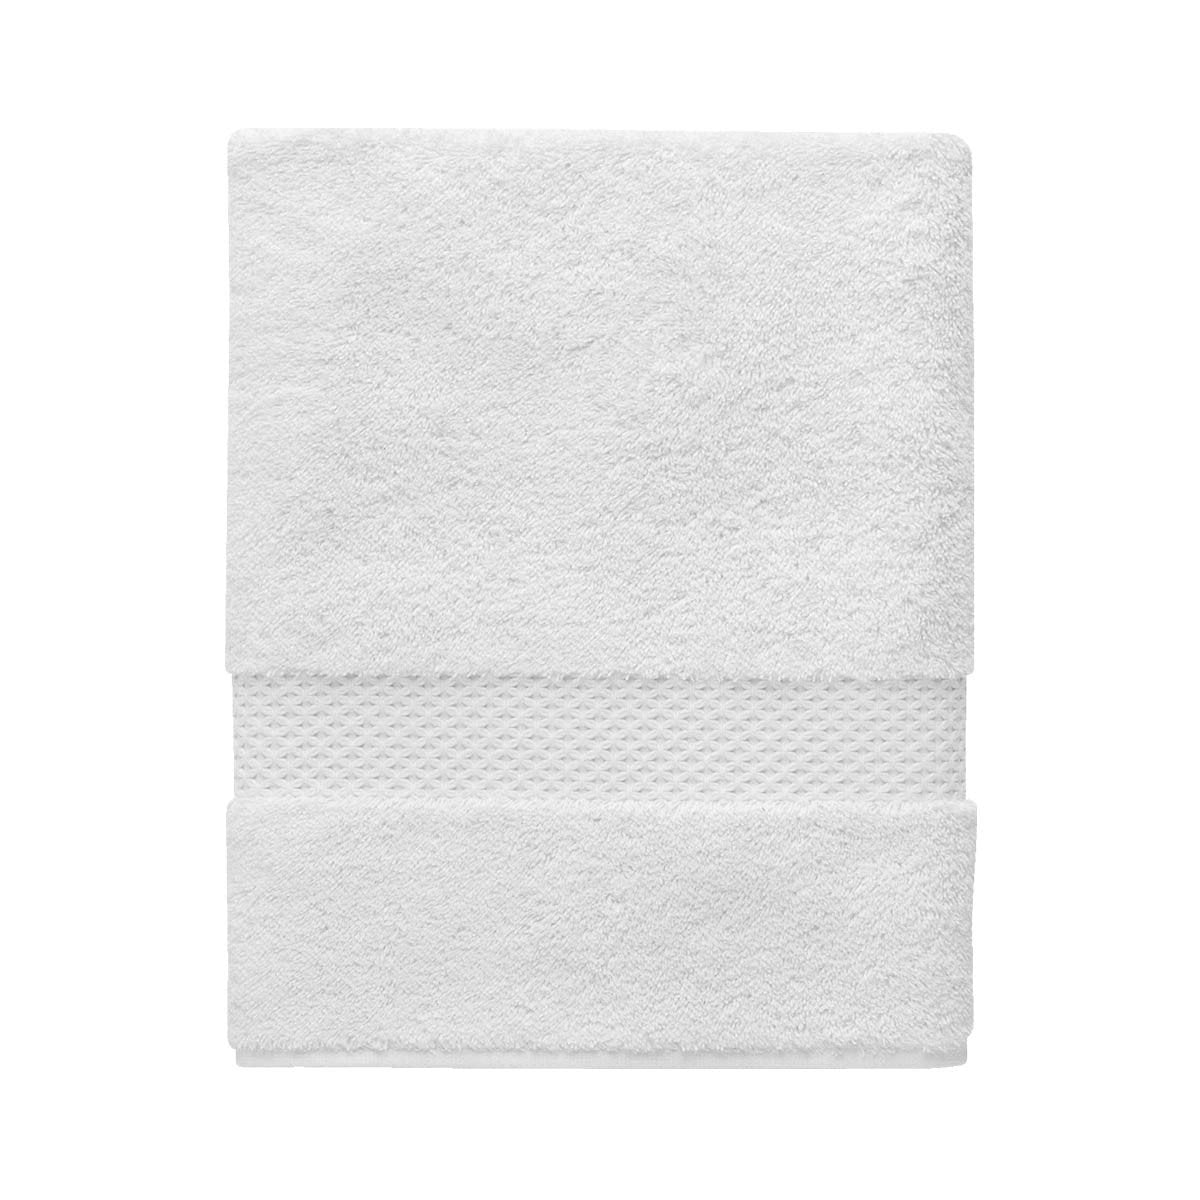 Etoile Blanc Bath Collection by Yves Delorme | Fig Linens - White bath linen, towels